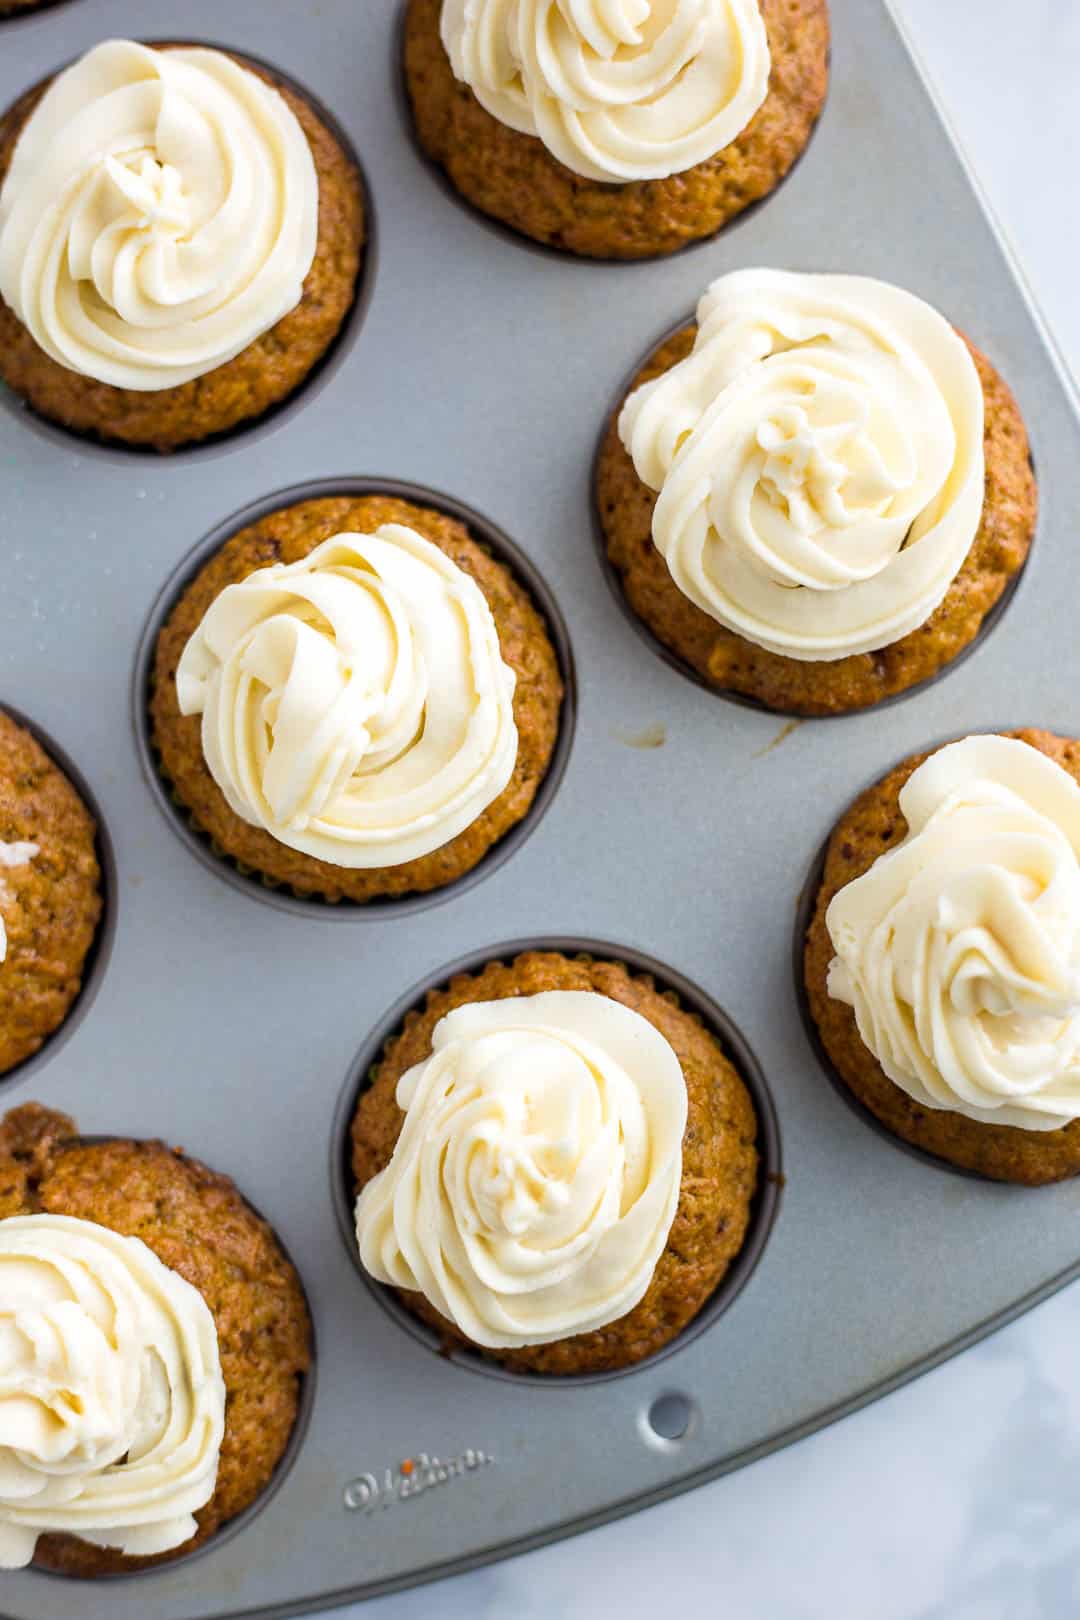 Just frosted Carrot Cake Cupcakes in a cupcake pan